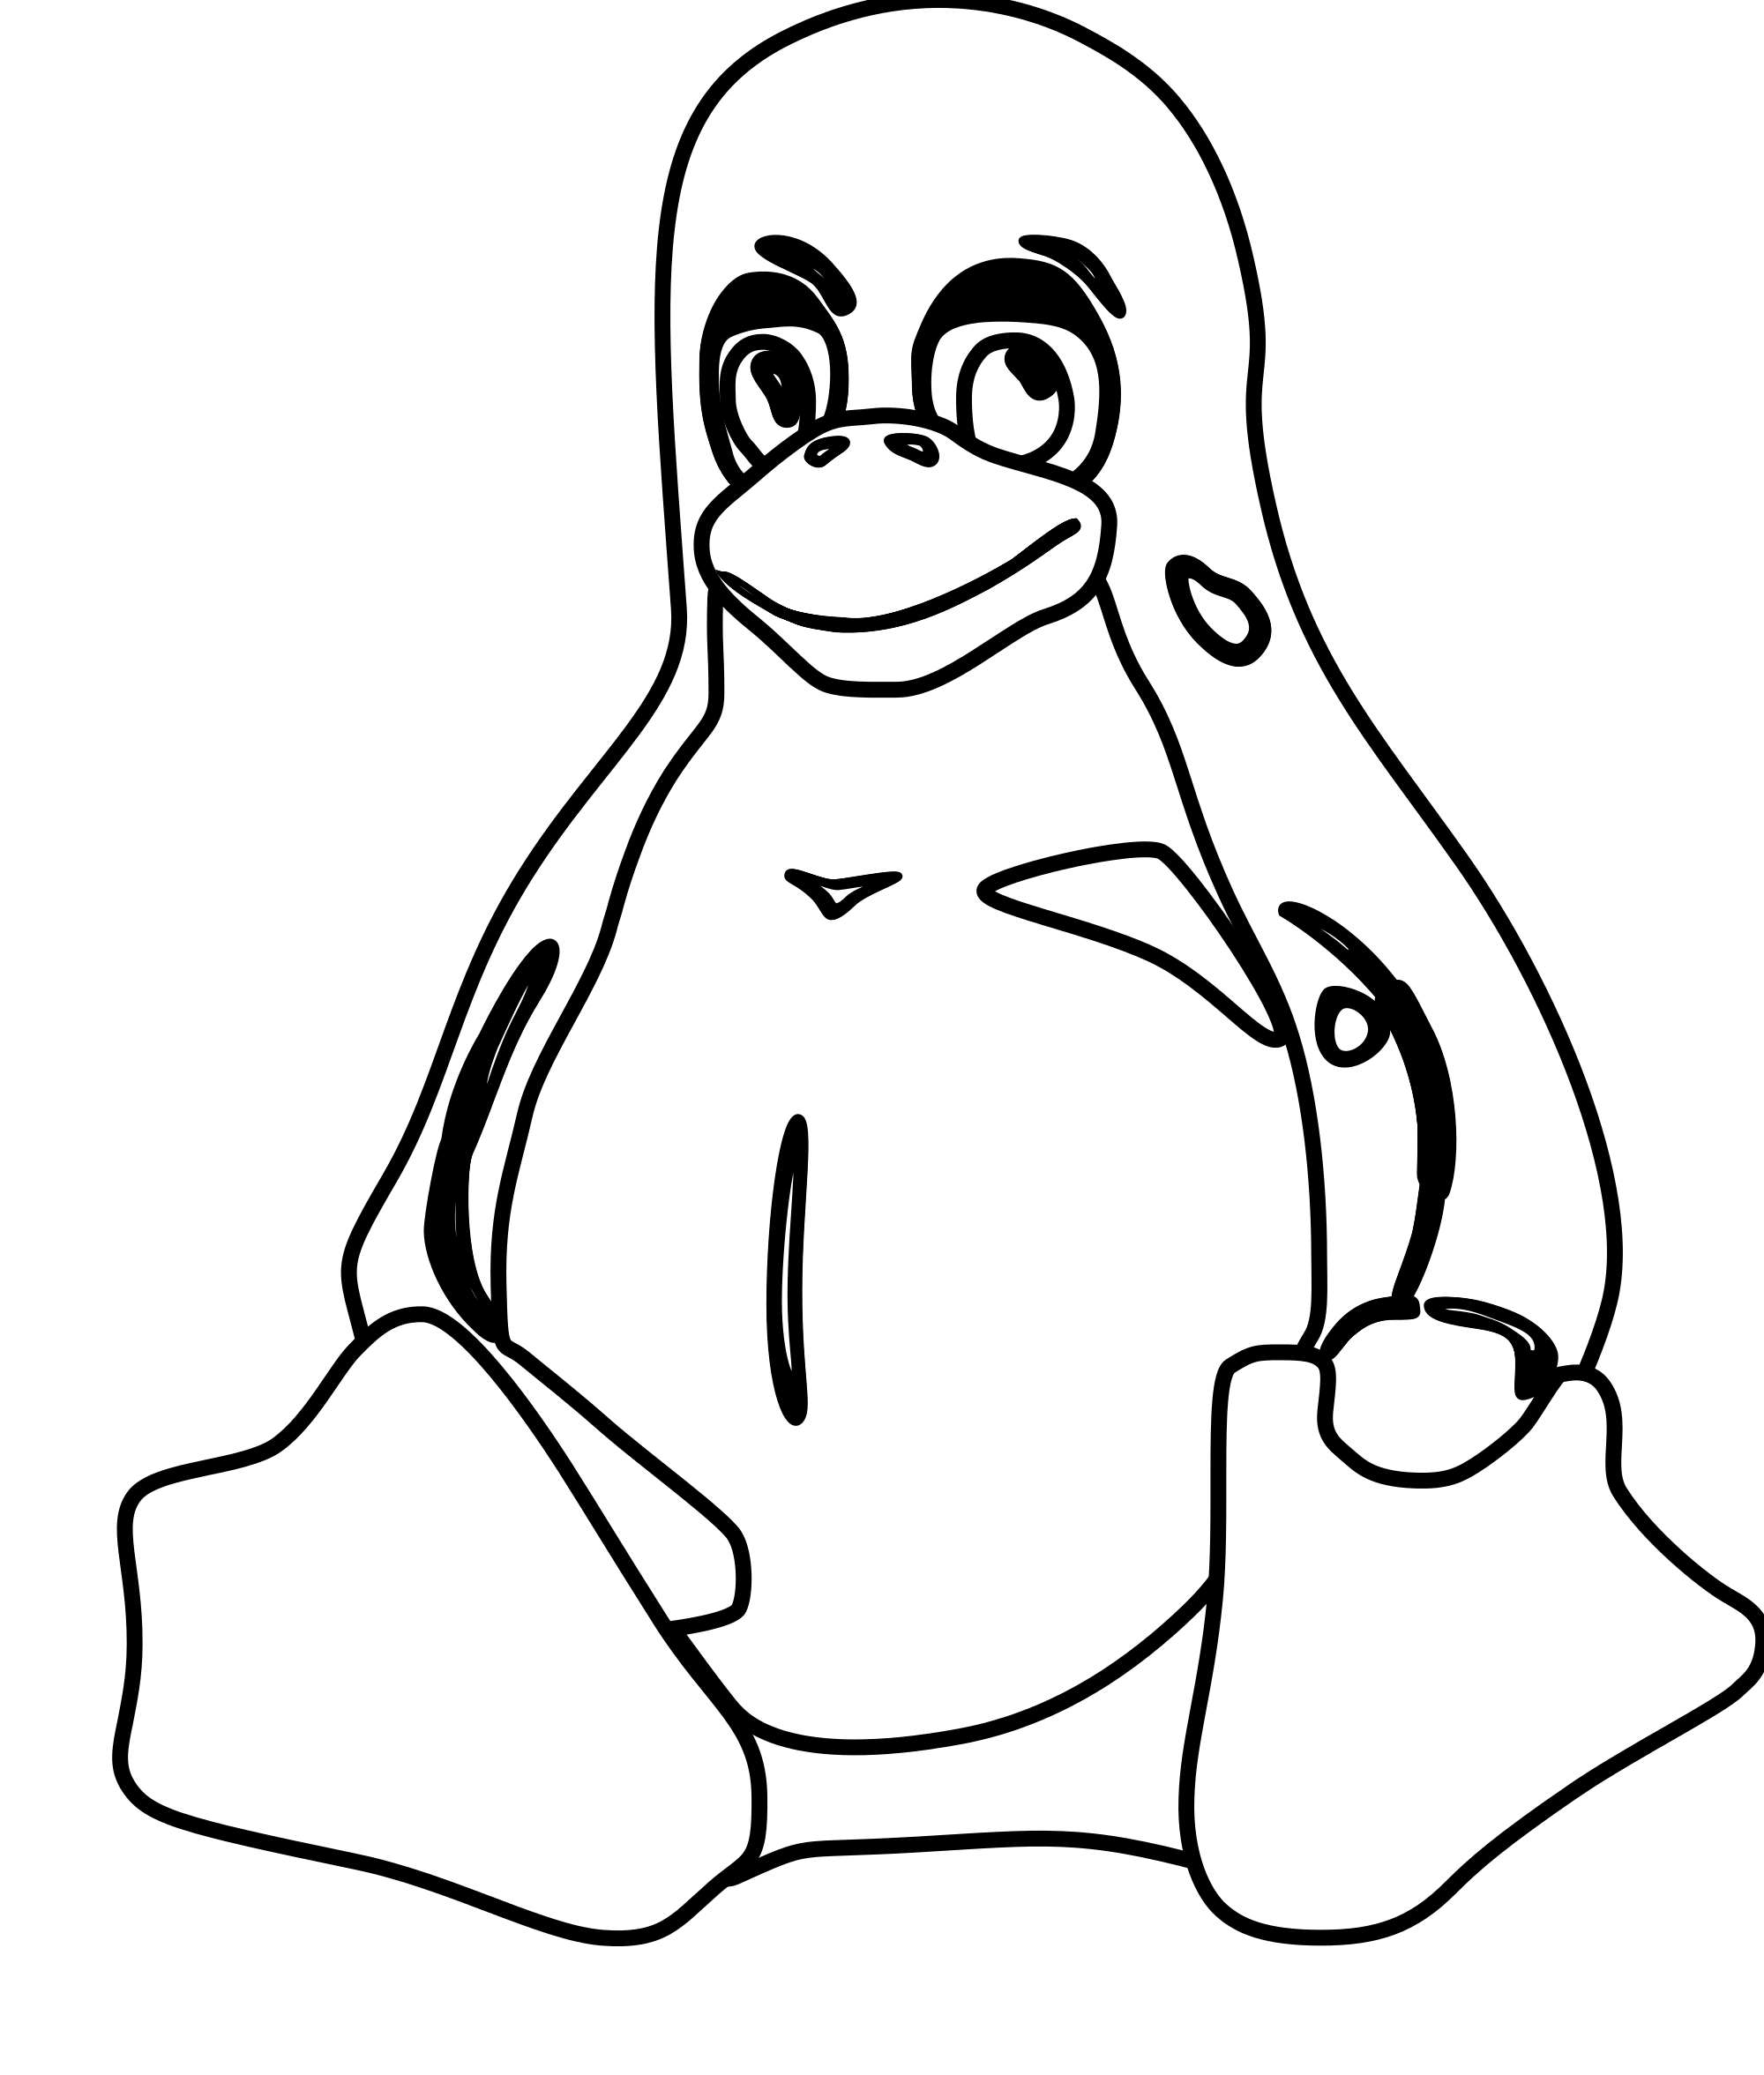 Penguin clipart macaroni penguin. Outline drawing at getdrawings